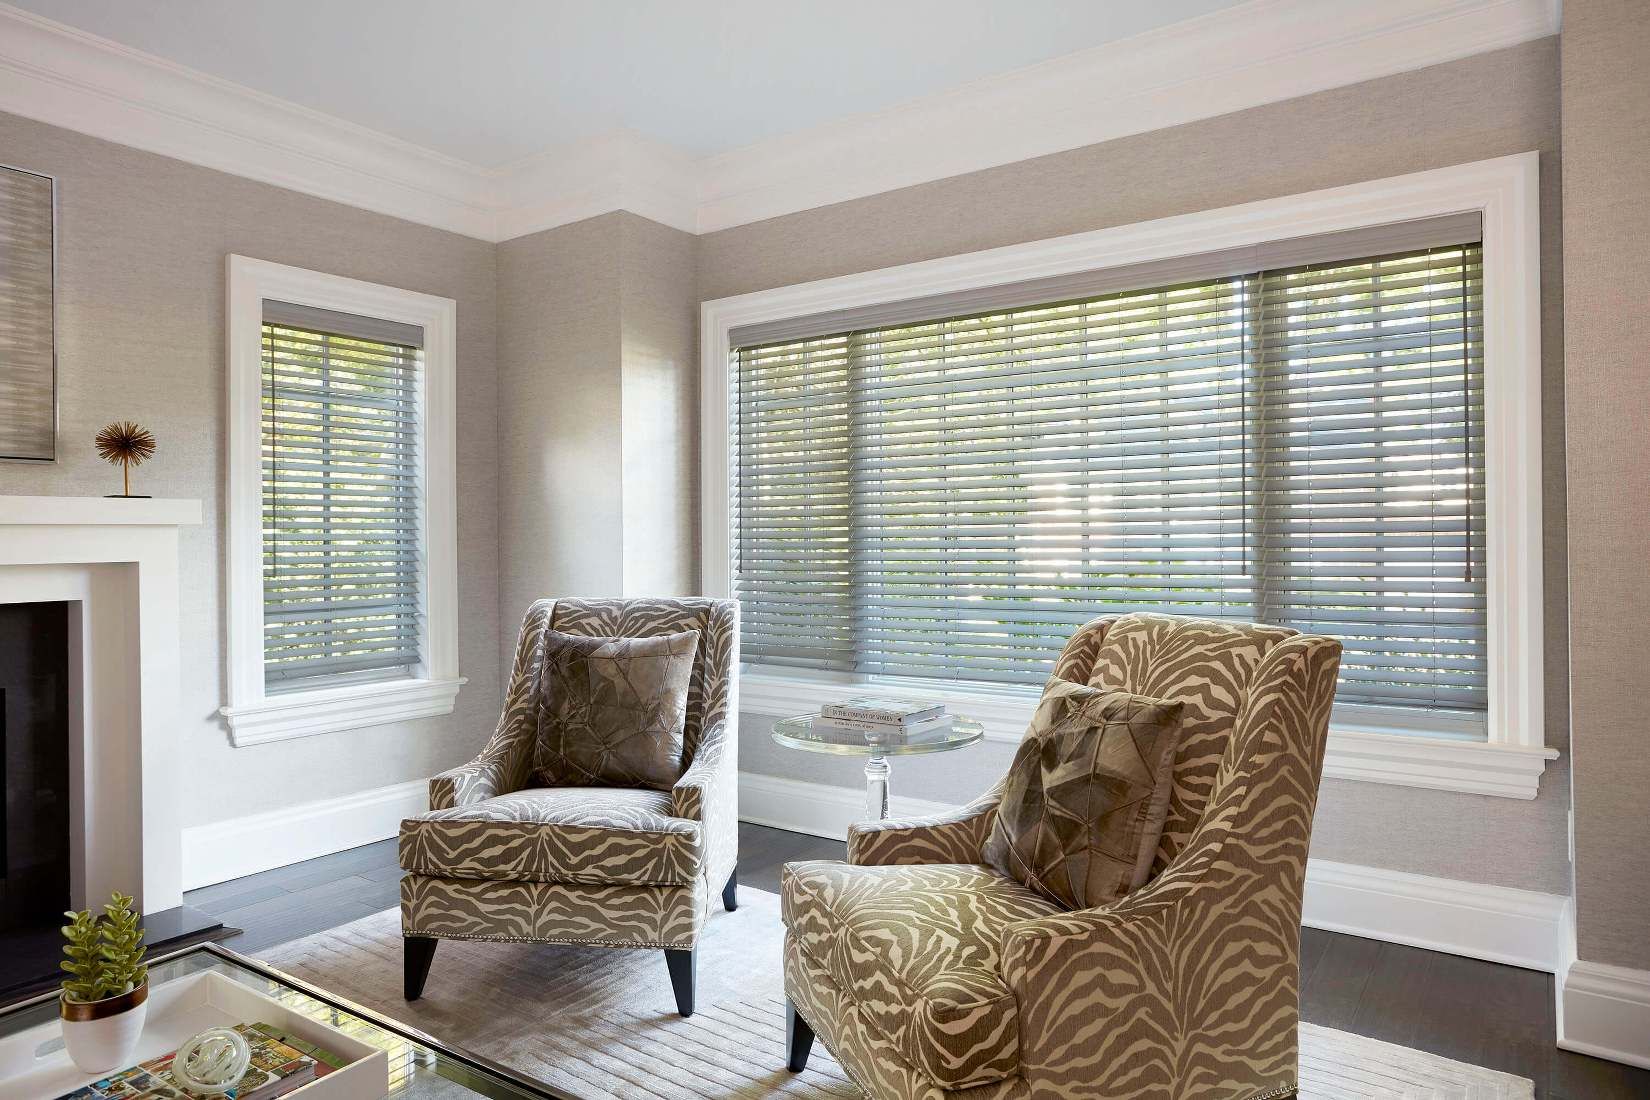 Living Room Window Blinds Ideas: A World Of Possibilities